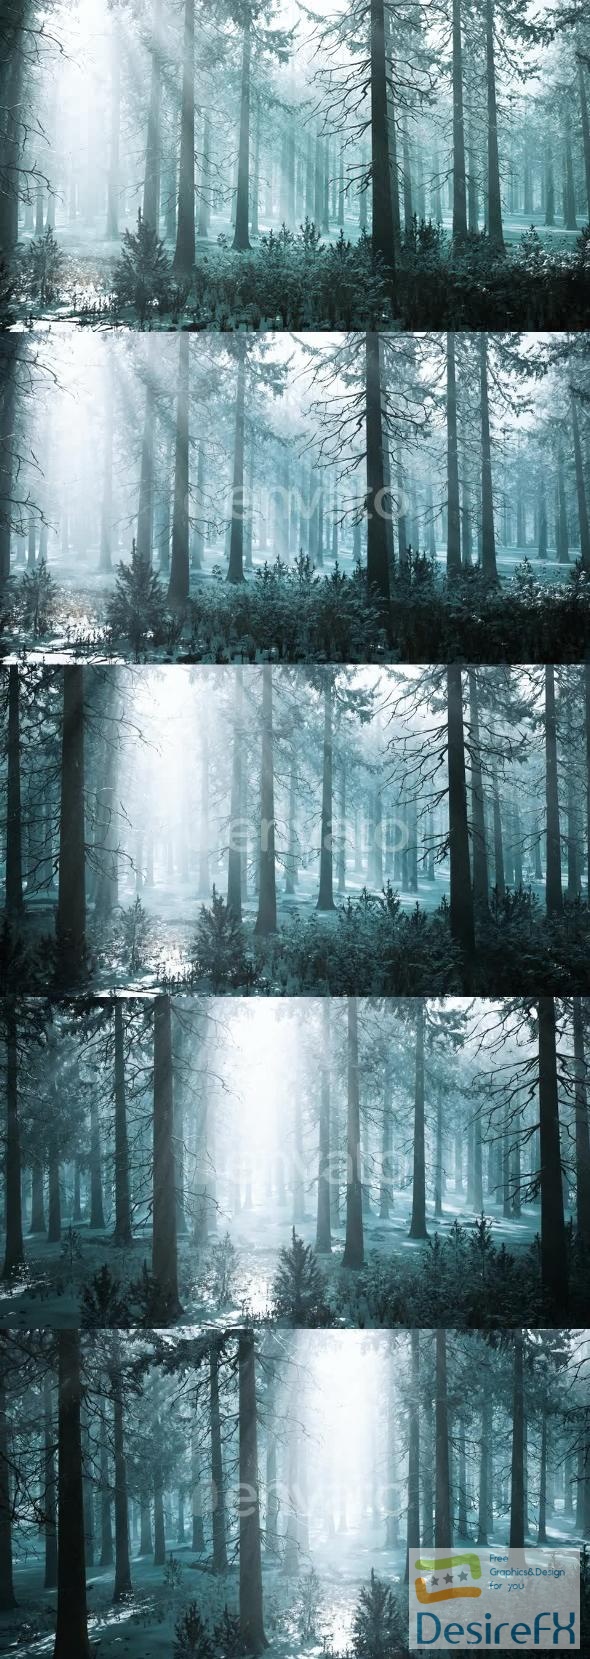 VideoHive Winter Foggy Beech and Spruce Forest Scene 47581102